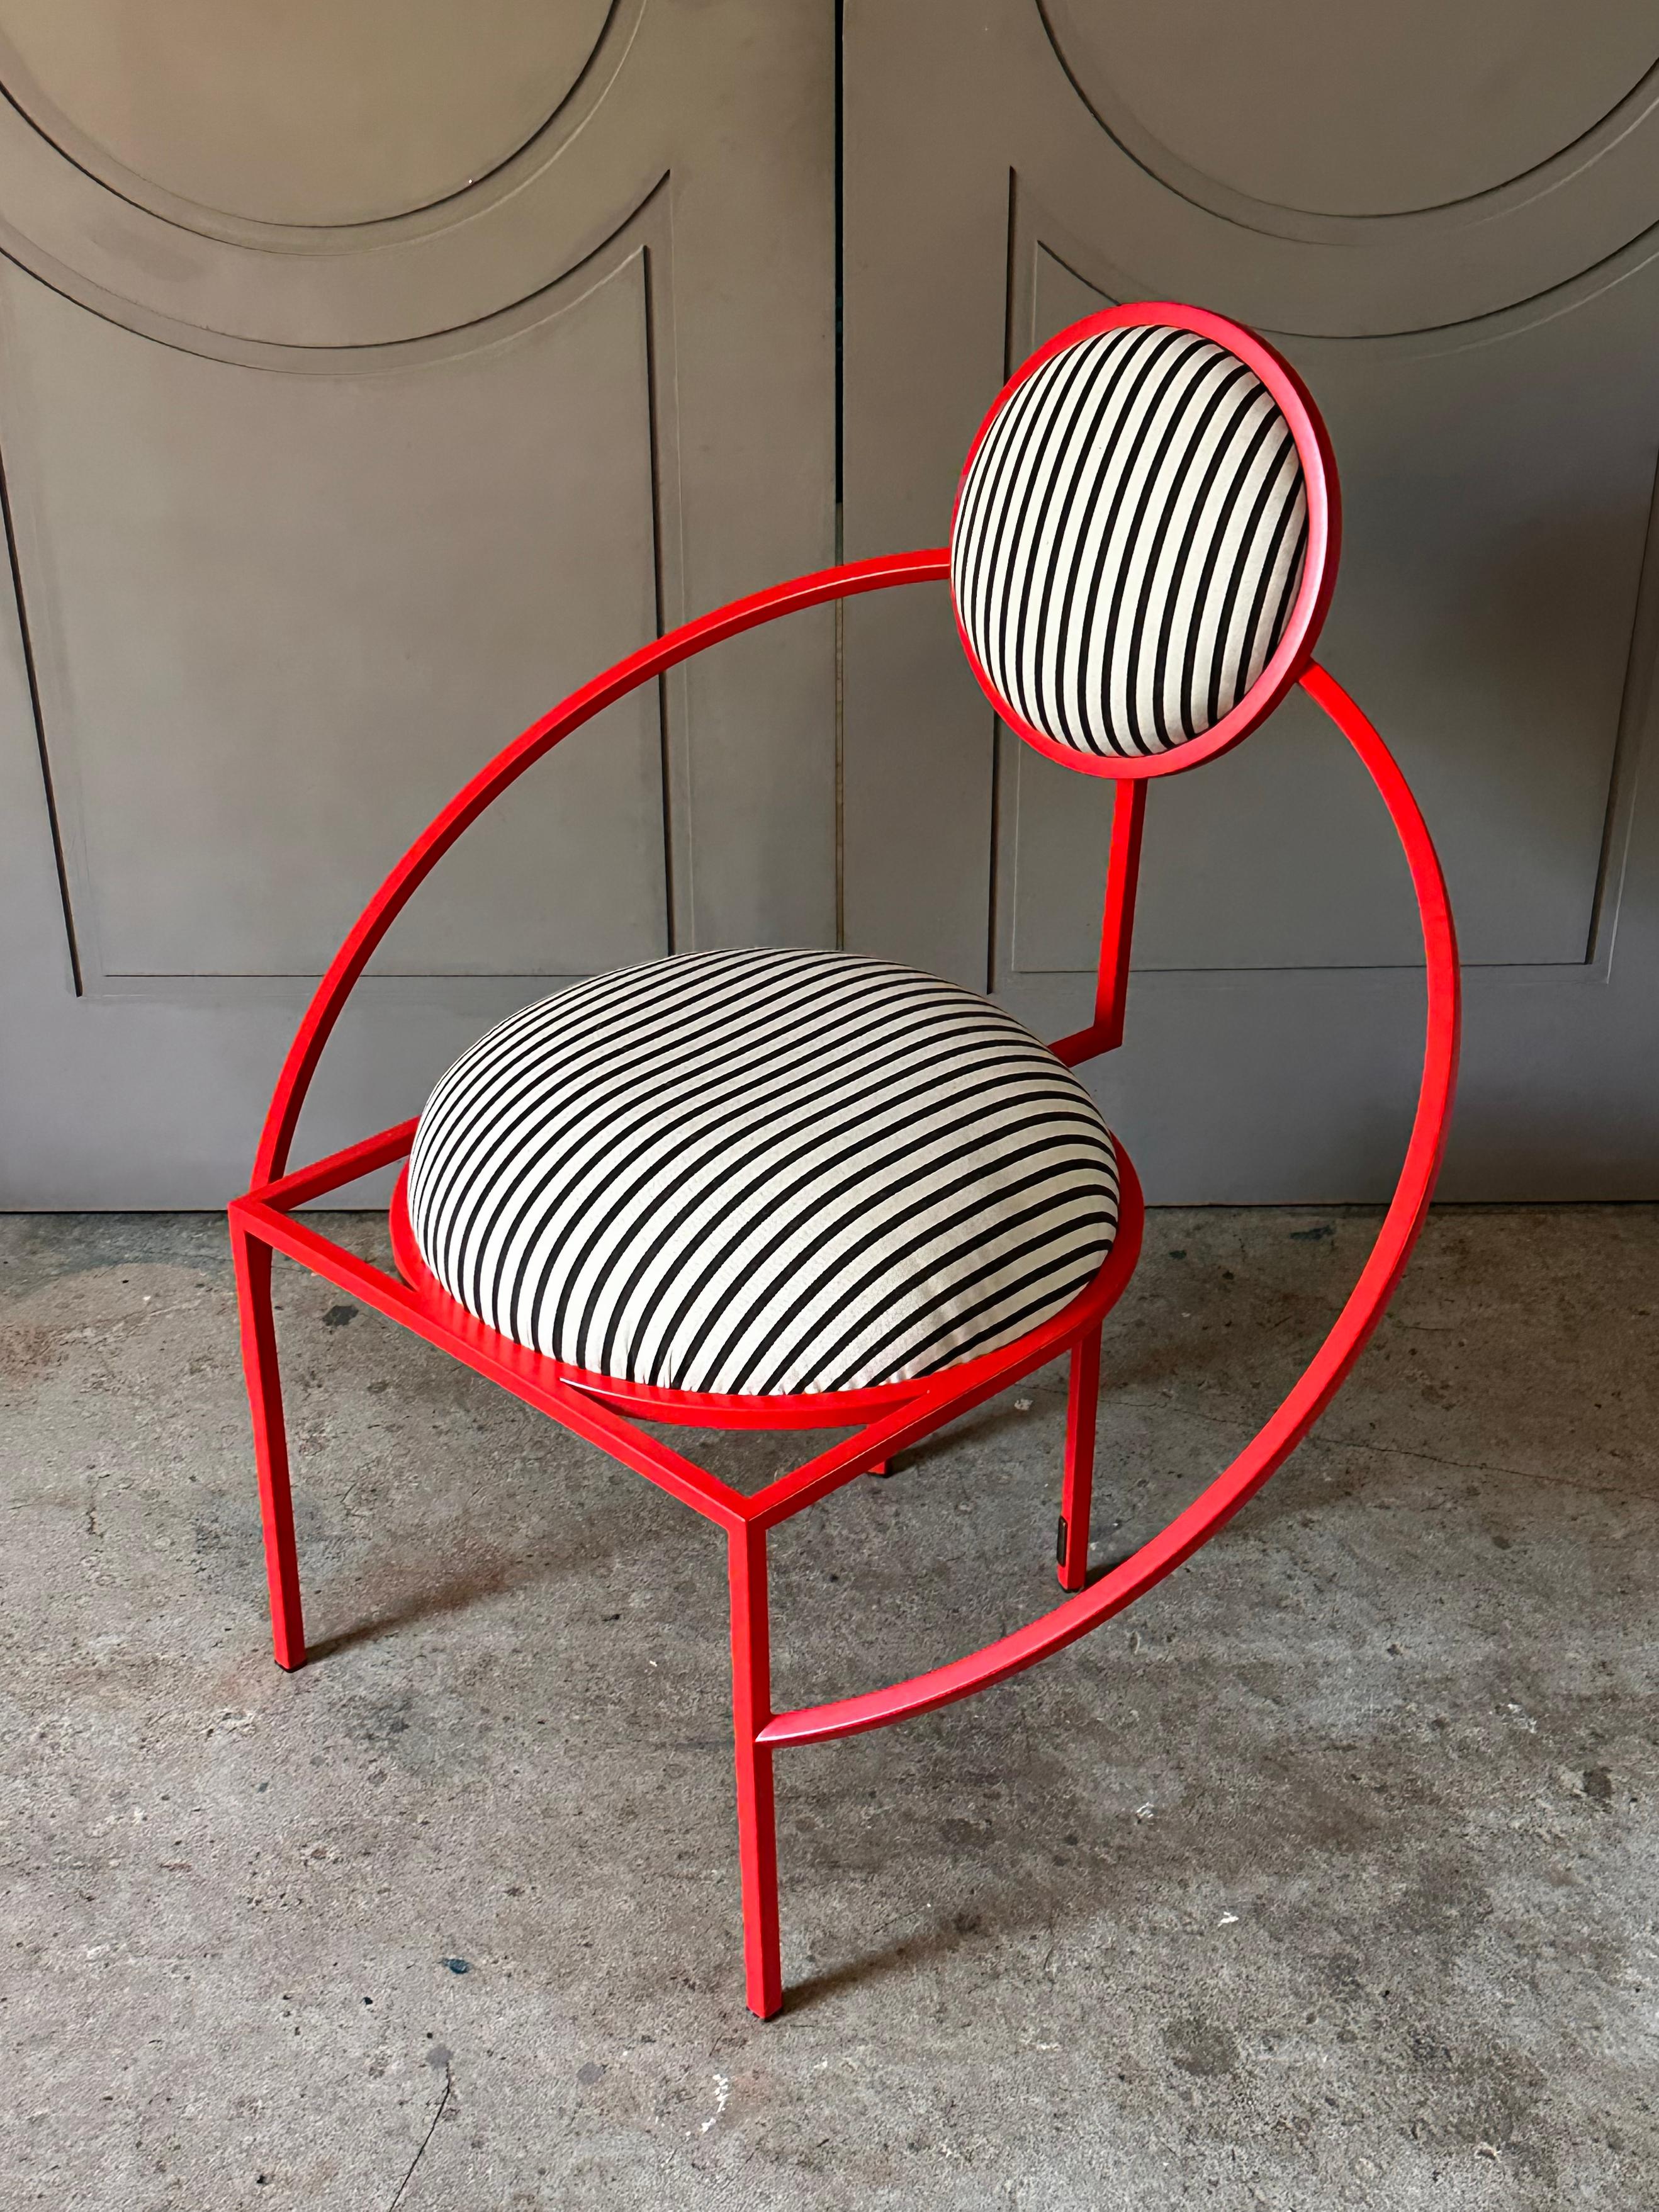 The Orbit Chair is now available with outdoor specifics and can be left outside all year round, even in winter. The frame is made from powder coated stainless steel to protect it from rust. The upholstery is engineered so rain water can simply drip